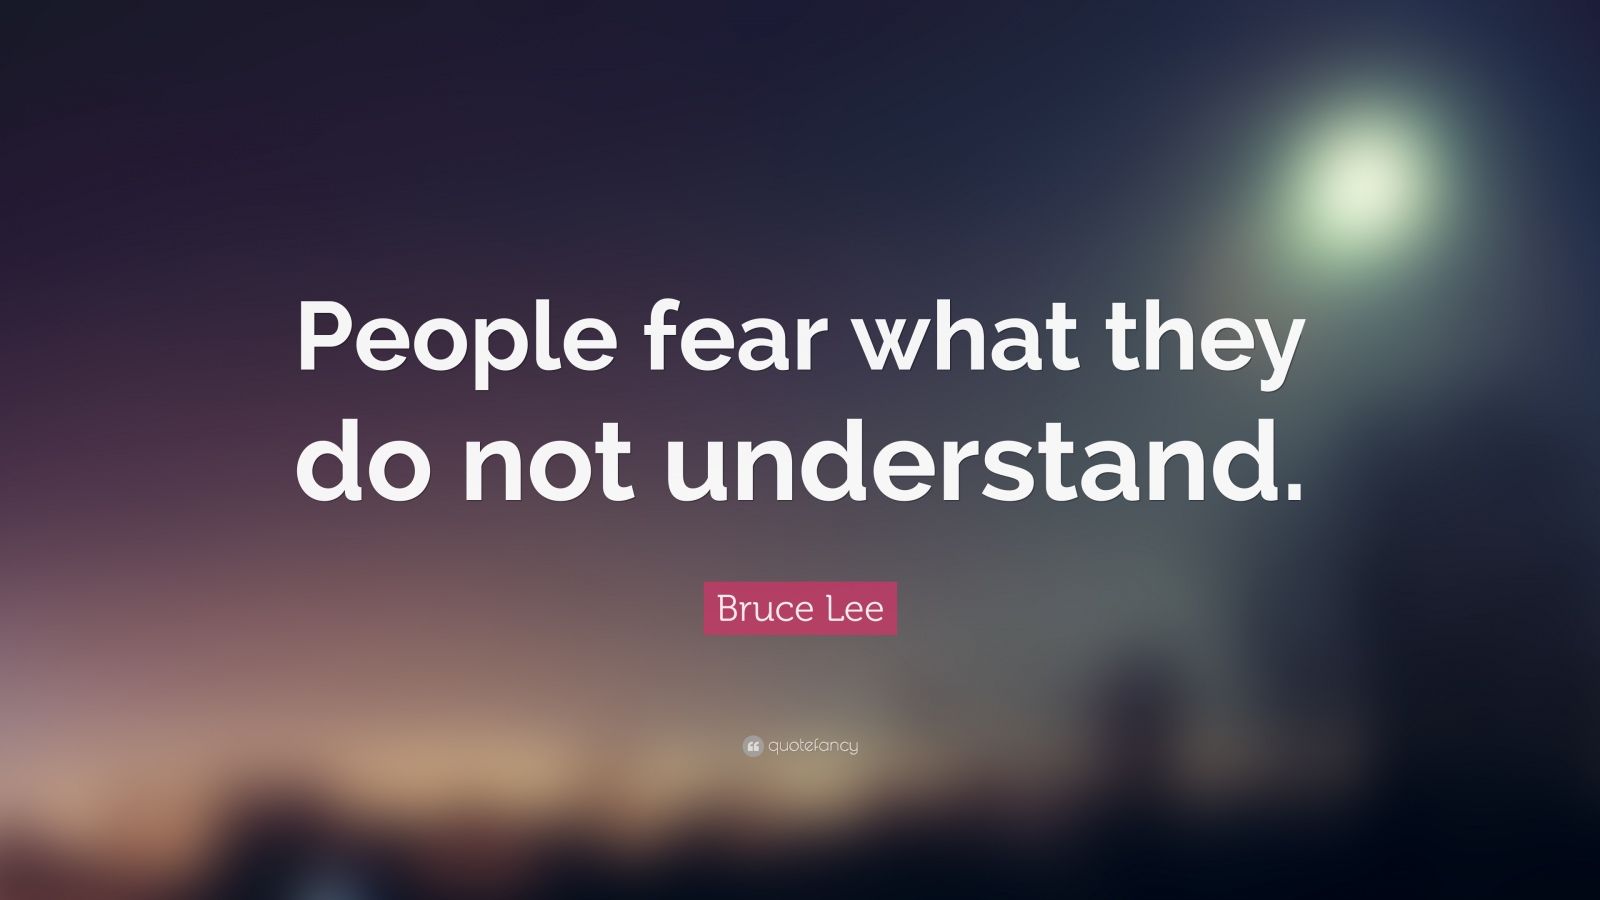 Bruce Lee Quote: “People fear what they do not understand.” (12